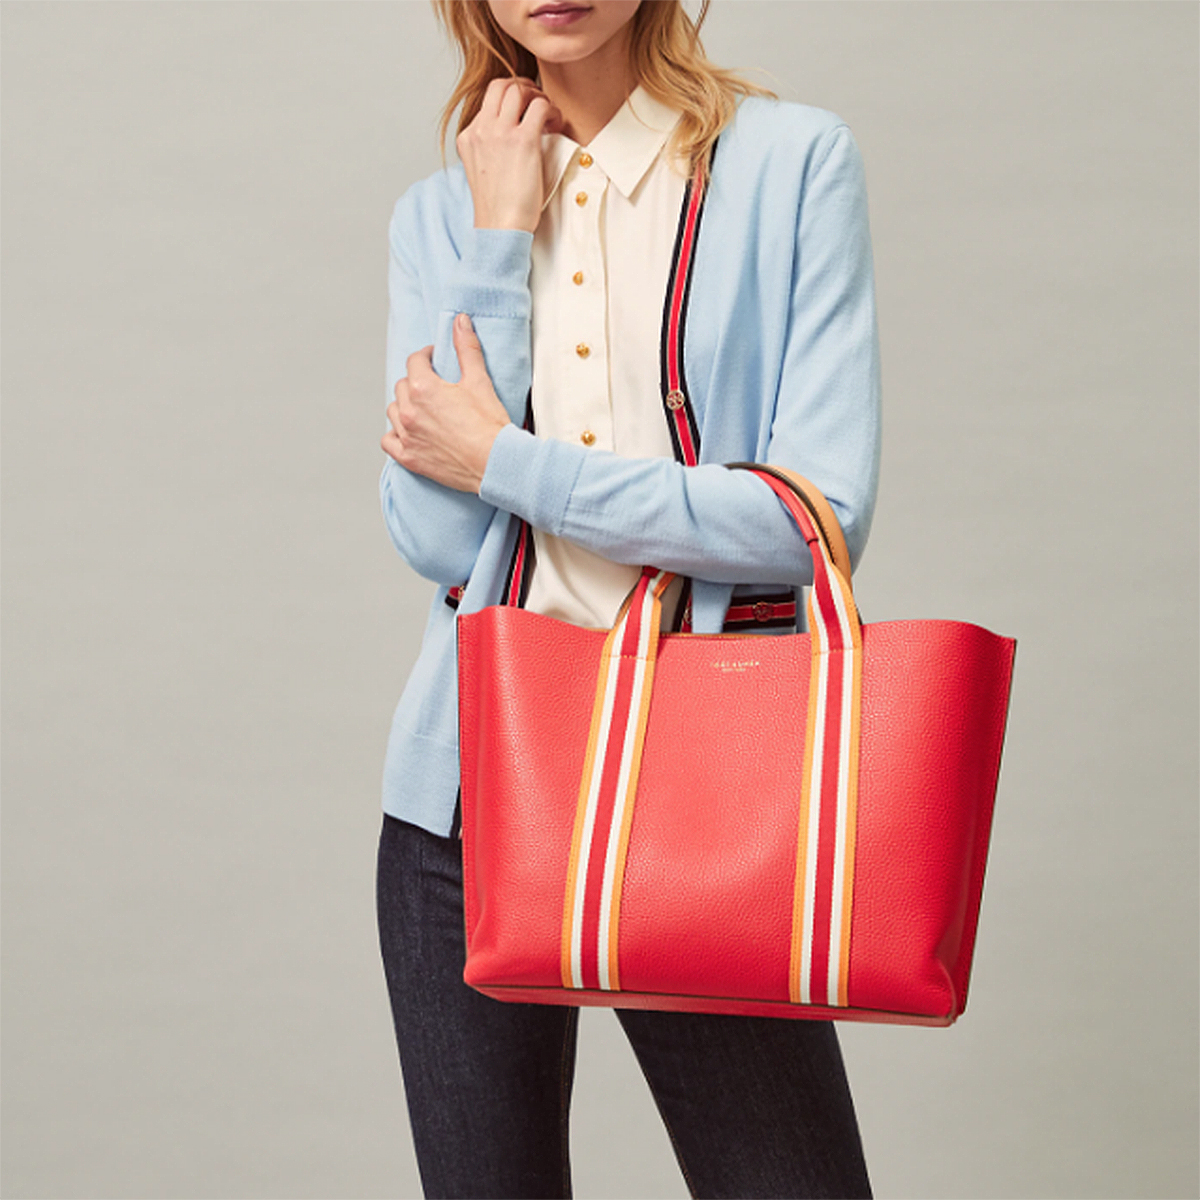 Tory Burch Perry Tote Is Nearly $300 Off Right Now